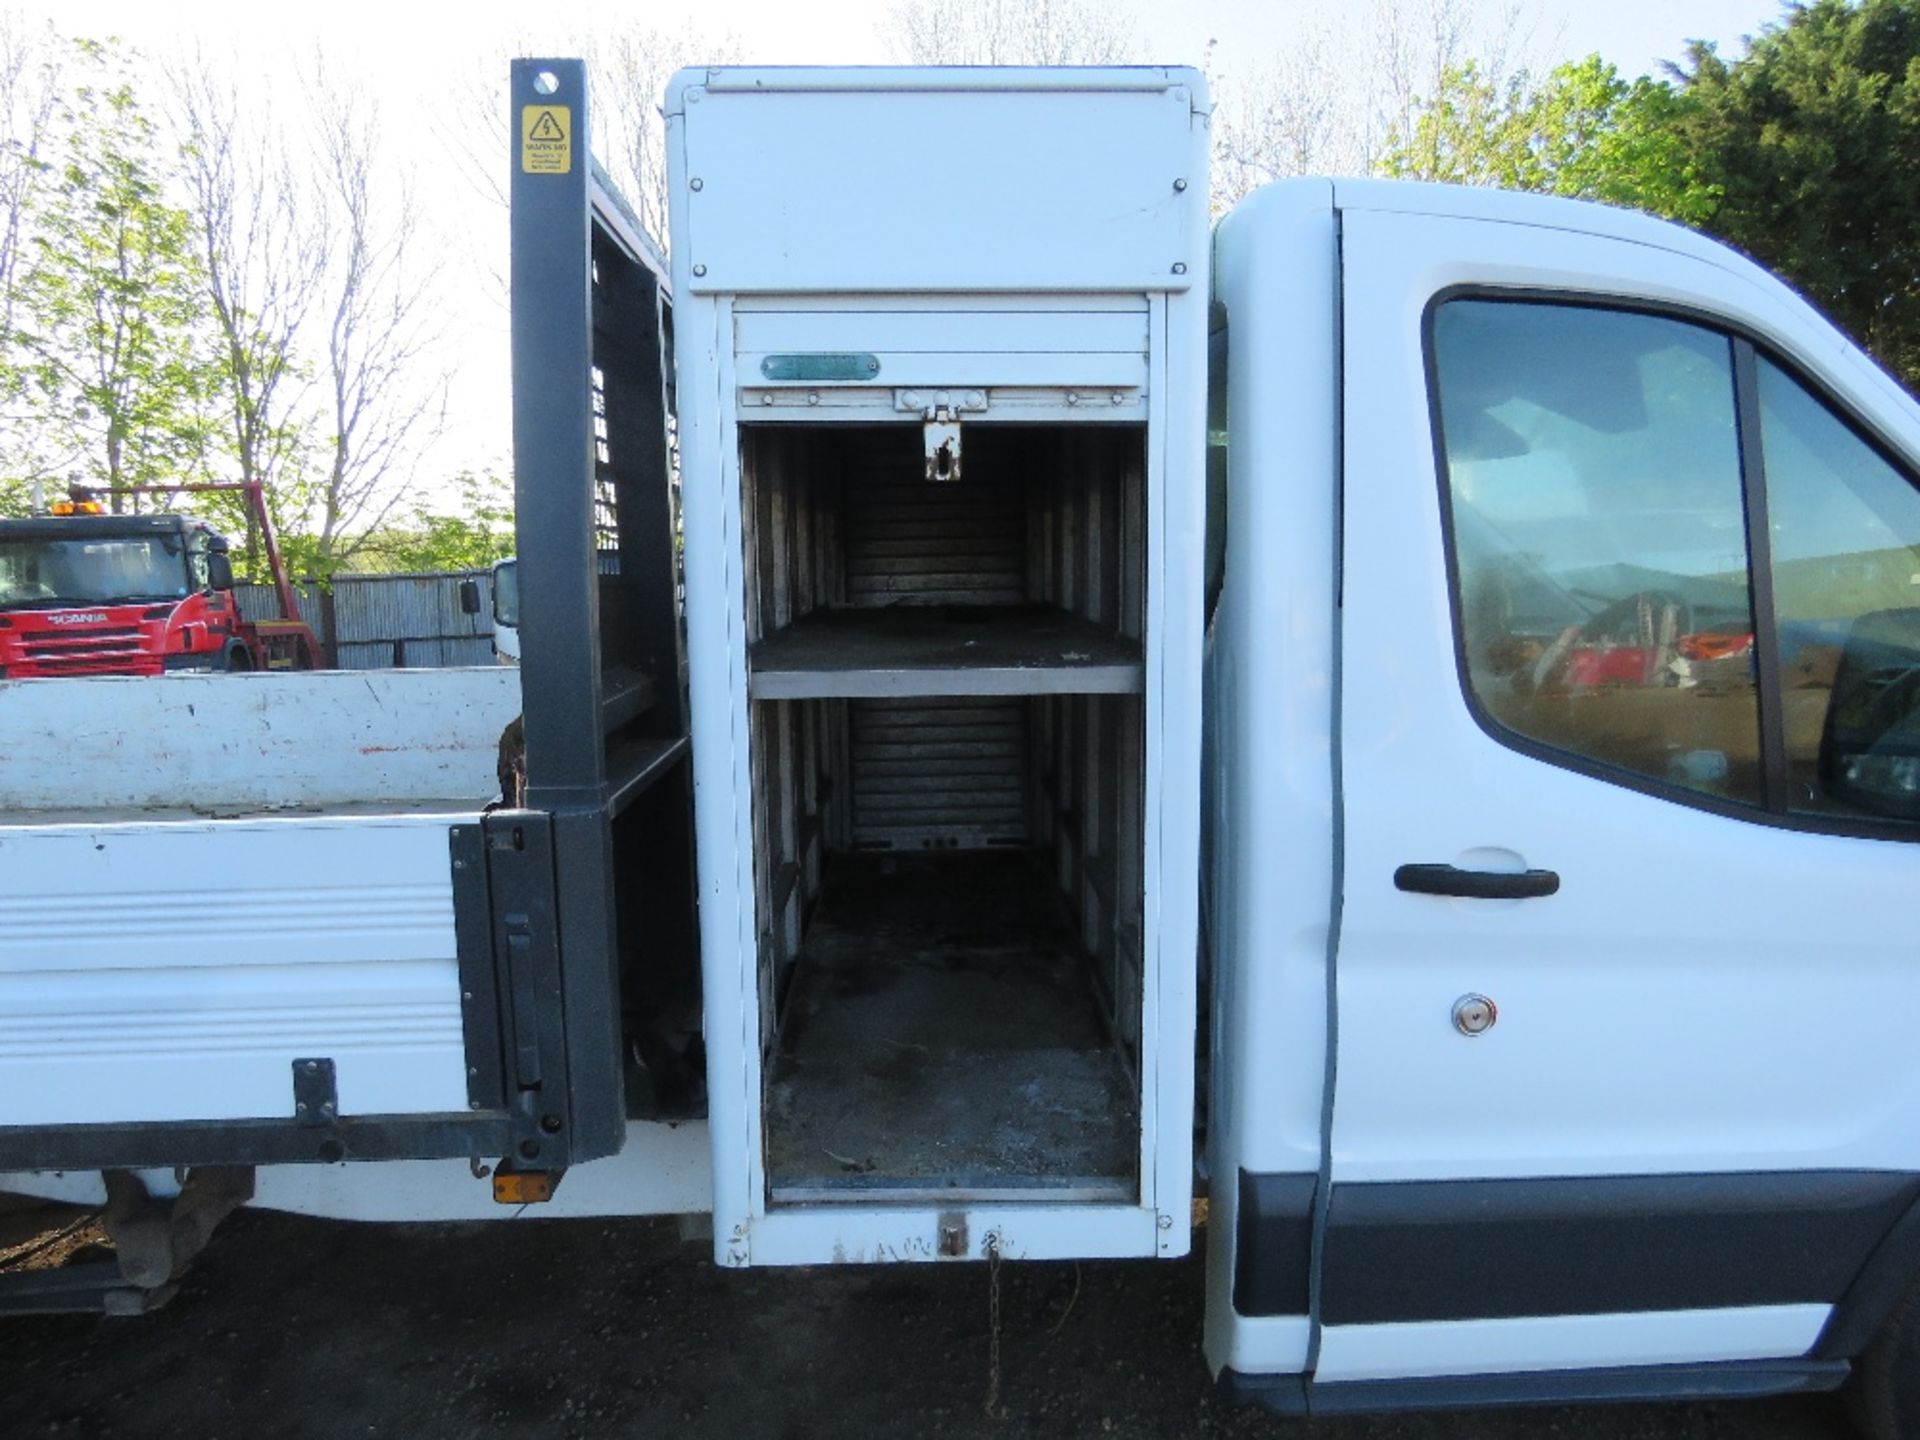 FORD TRANSIT TIPPER TRUCK WITH TOOL STORAGE LOCKER REG:BF65 GMZ. WITH V5 AND MOT UNTIL15.04.25. FIRS - Image 10 of 17